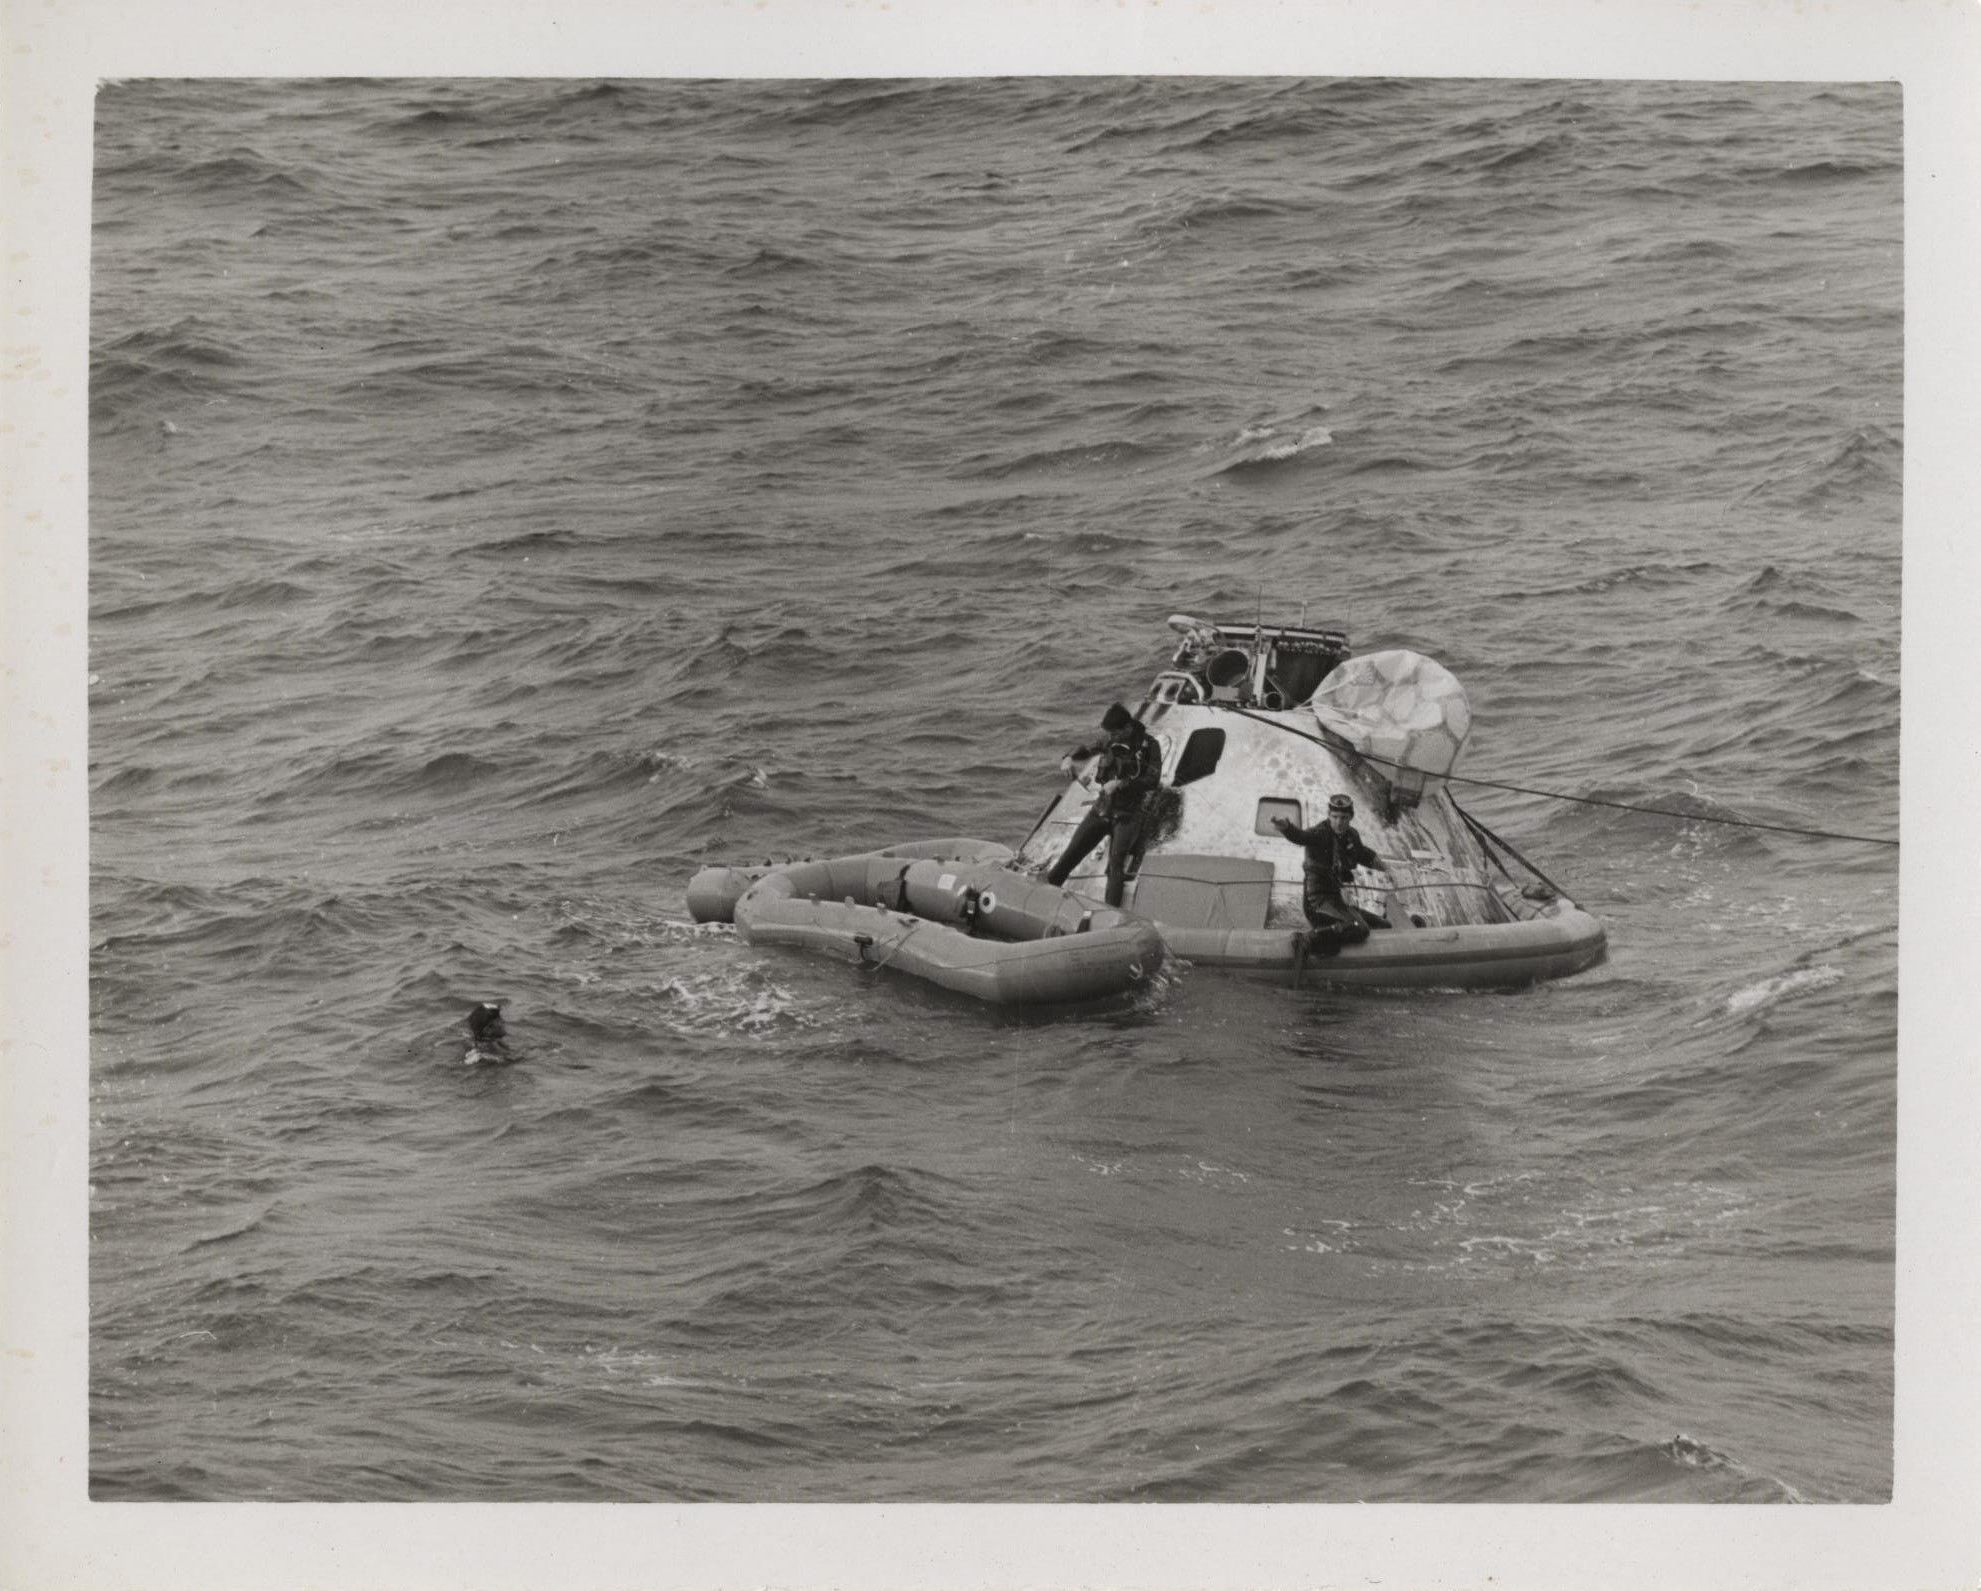 Primary Image of Recovering The Apollo 8 Capsule